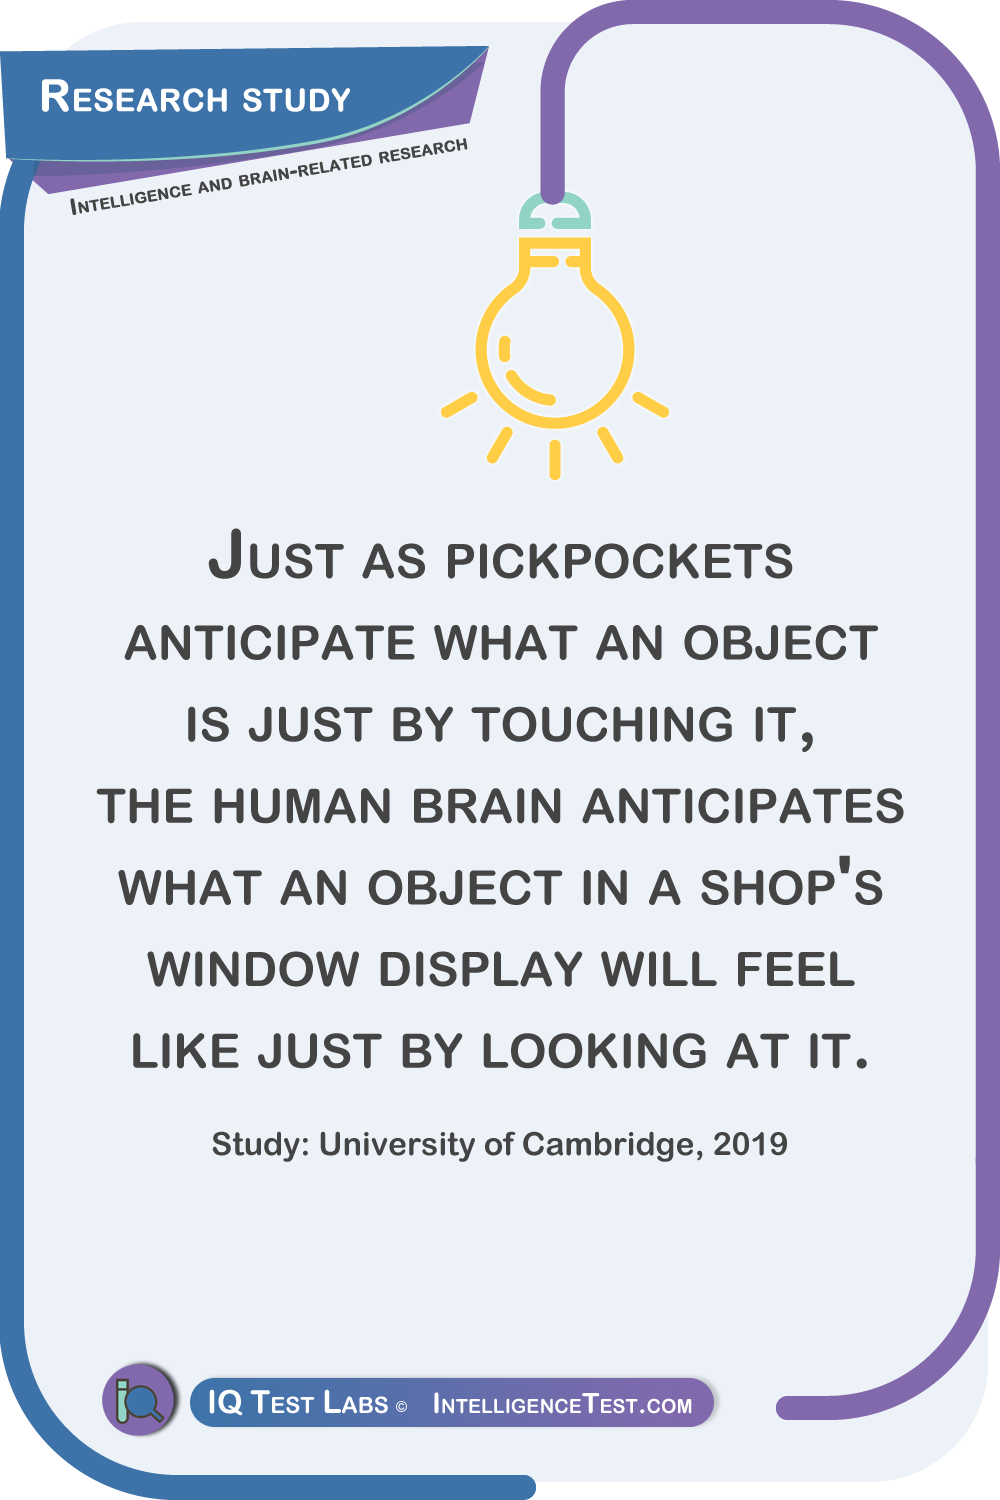 Just as pickpockets anticipate what an object is just by touching it, the human brain anticipates what an object in a shop's window display will feel like just by looking at it. Study: University of Cambridge, 2019